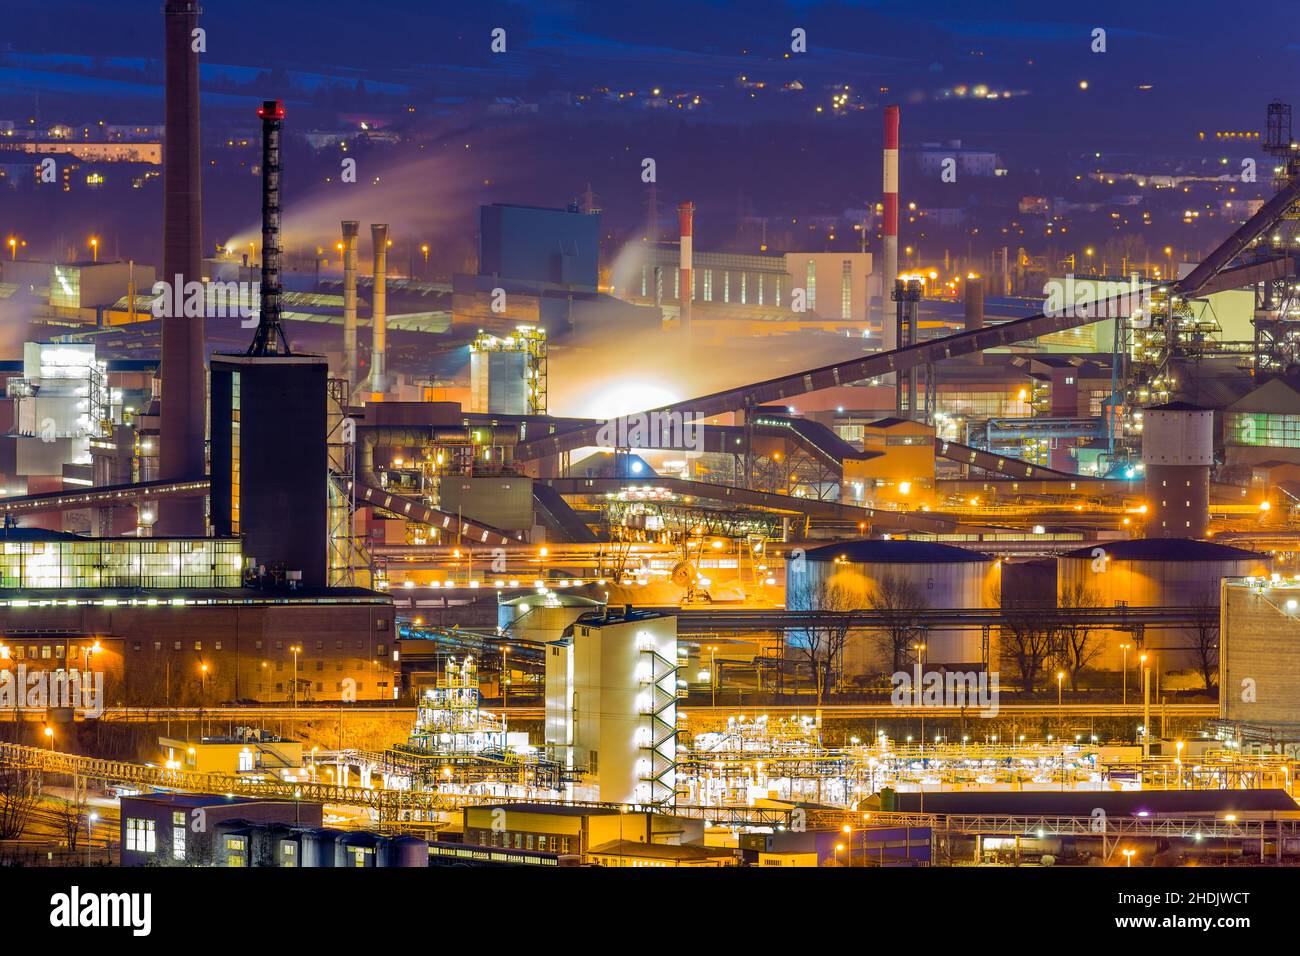 industry, industrial plant, industries, industrial plants Stock Photo